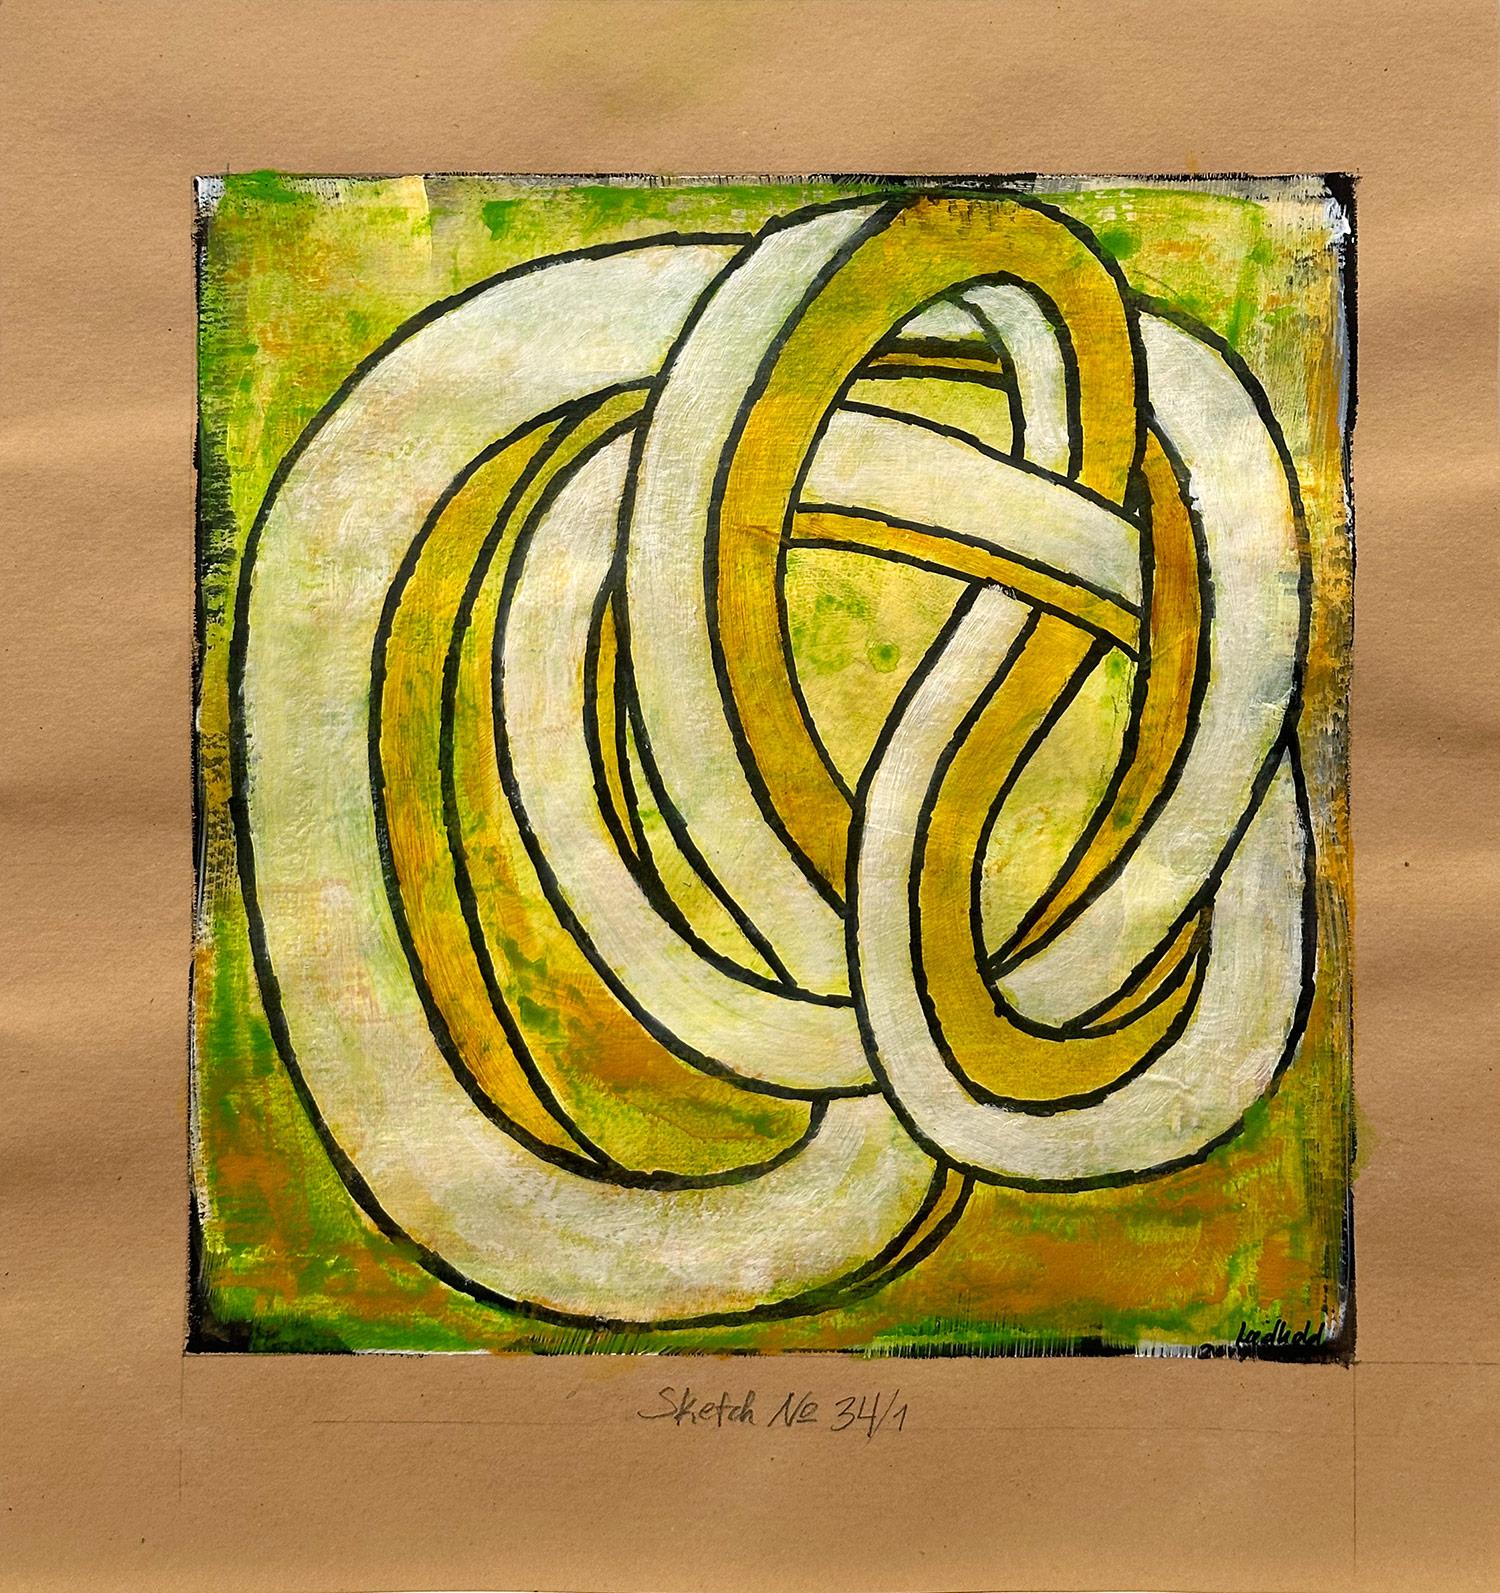 Wolfgang Leidhold Abstract Painting - "Sketch No.34/1" Abstract Representational Kinetic Knot Painting Work on Paper